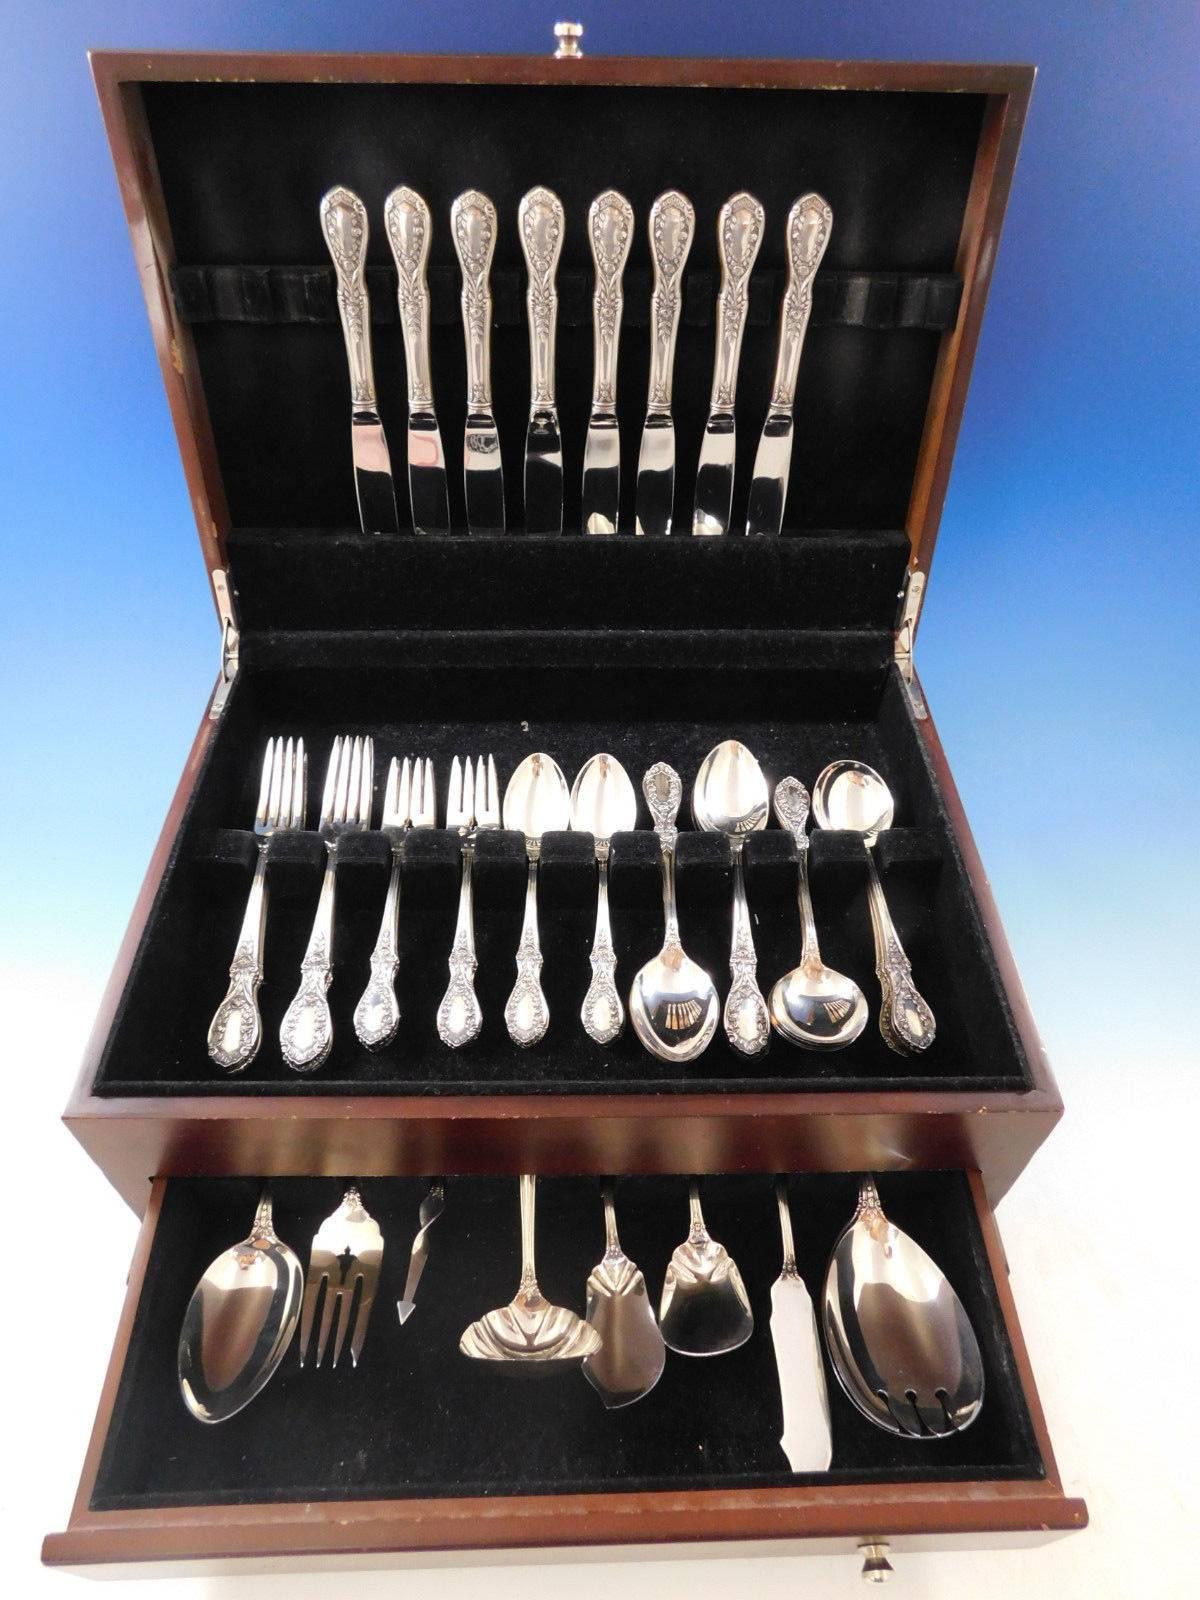 Gorgeous American Beauty by Manchester sterling silver flatware set - 57 pieces. This set includes:

Eight knives, 8 5/8